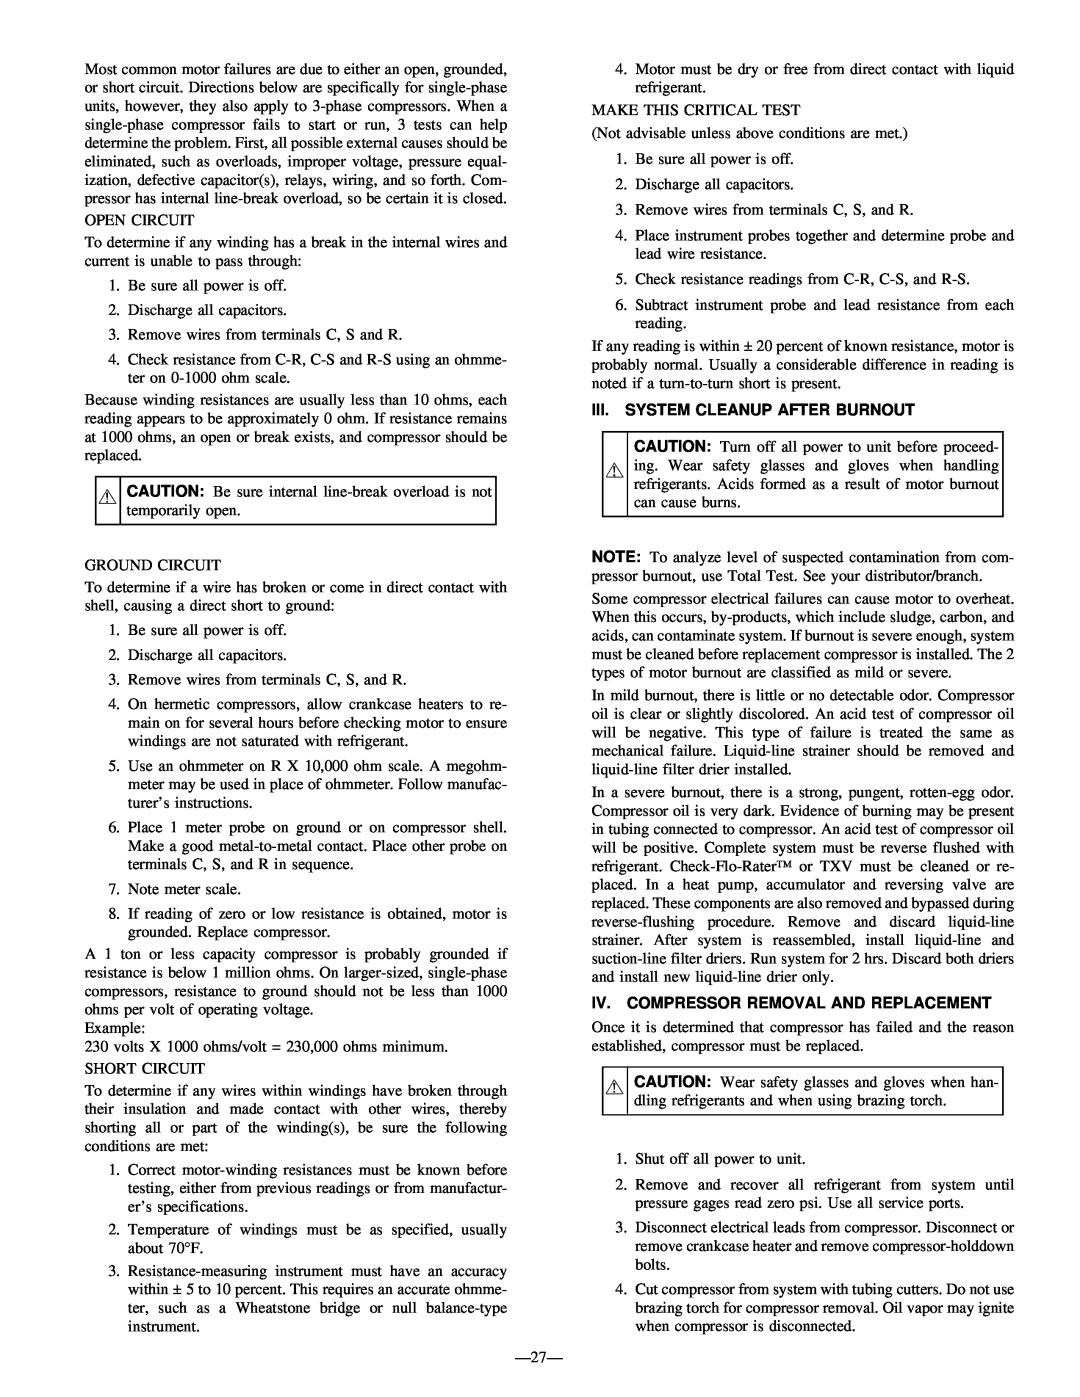 Bryant R-22 service manual Iii. System Cleanup After Burnout, Iv. Compressor Removal And Replacement 